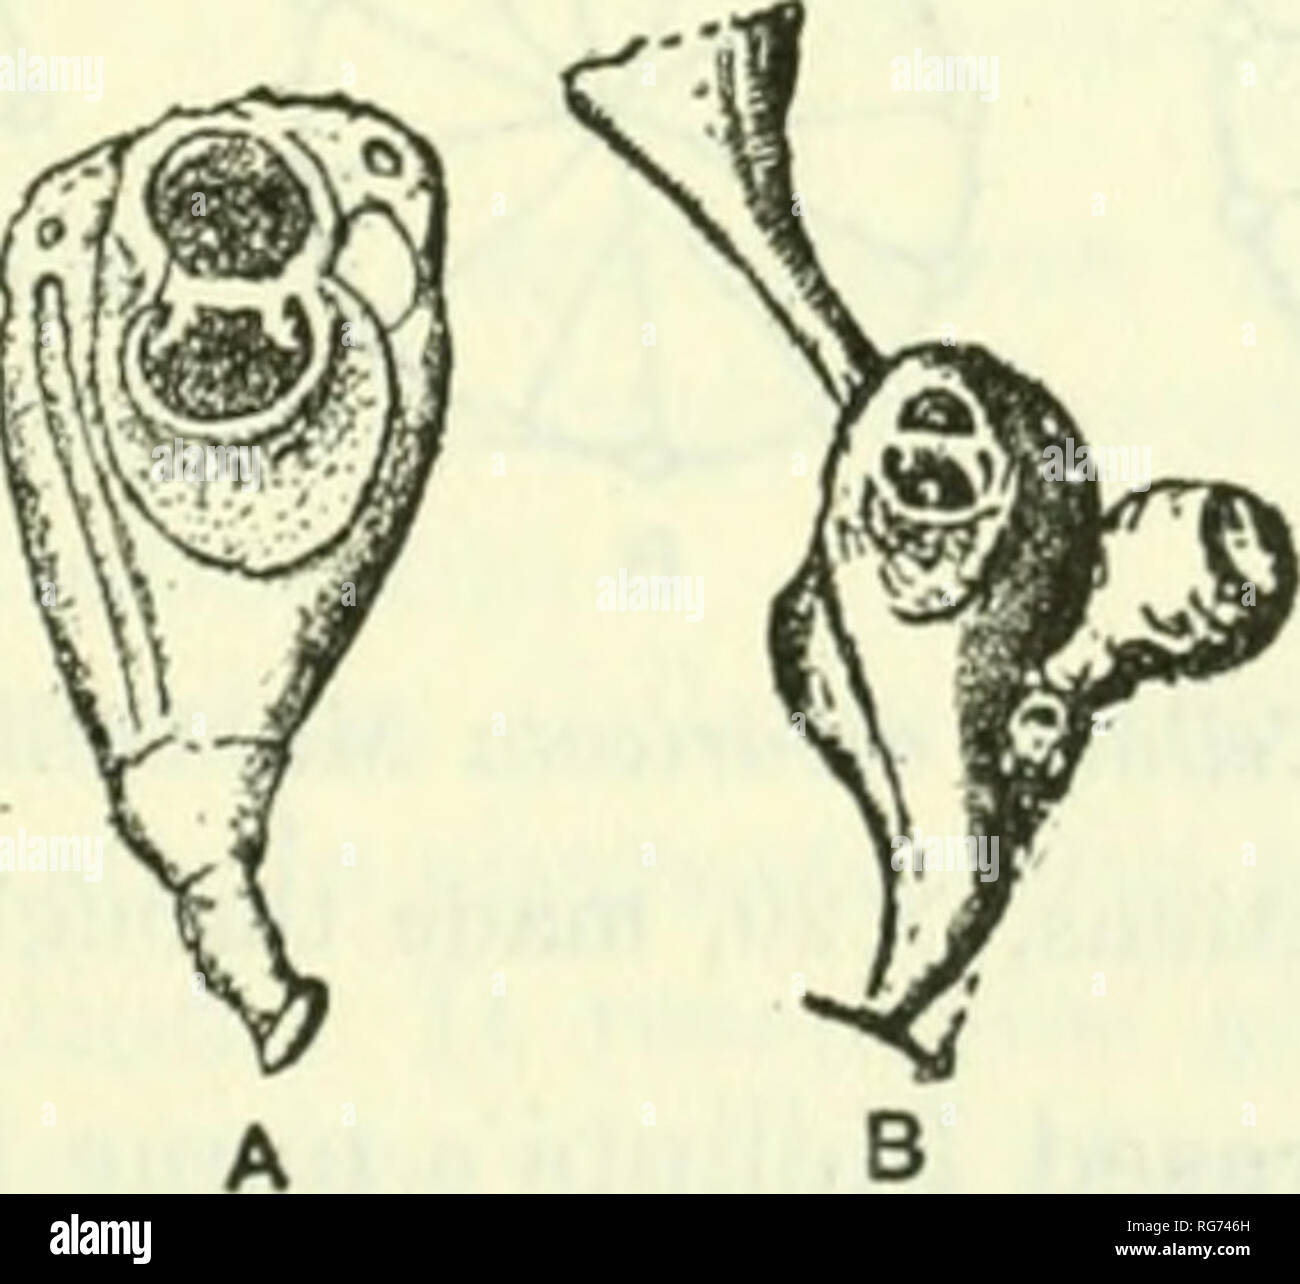 . Bulletin - United States National Museum. Science. Fig. 46.—Genus Alysidium Busk, 1852 A-O. Alysidium parasilicum Busk, 1852. A. A gonozooecium with a double-valved ovicell is seen on the lowermost zooecium, X40. B. A zooecium, X75. C. A zooecium from the basal surface. The bent distal wall is seen, X75. D. A longitudinal section through a zooecium, X75. E. A gonozooecium from the frontal zooecia bearing surface after the removal of the ovicell. The two elongated openings are seen, through which the ovicellarian valves have been in communication with the dietellae of the gonozooecium, X75. F Stock Photo